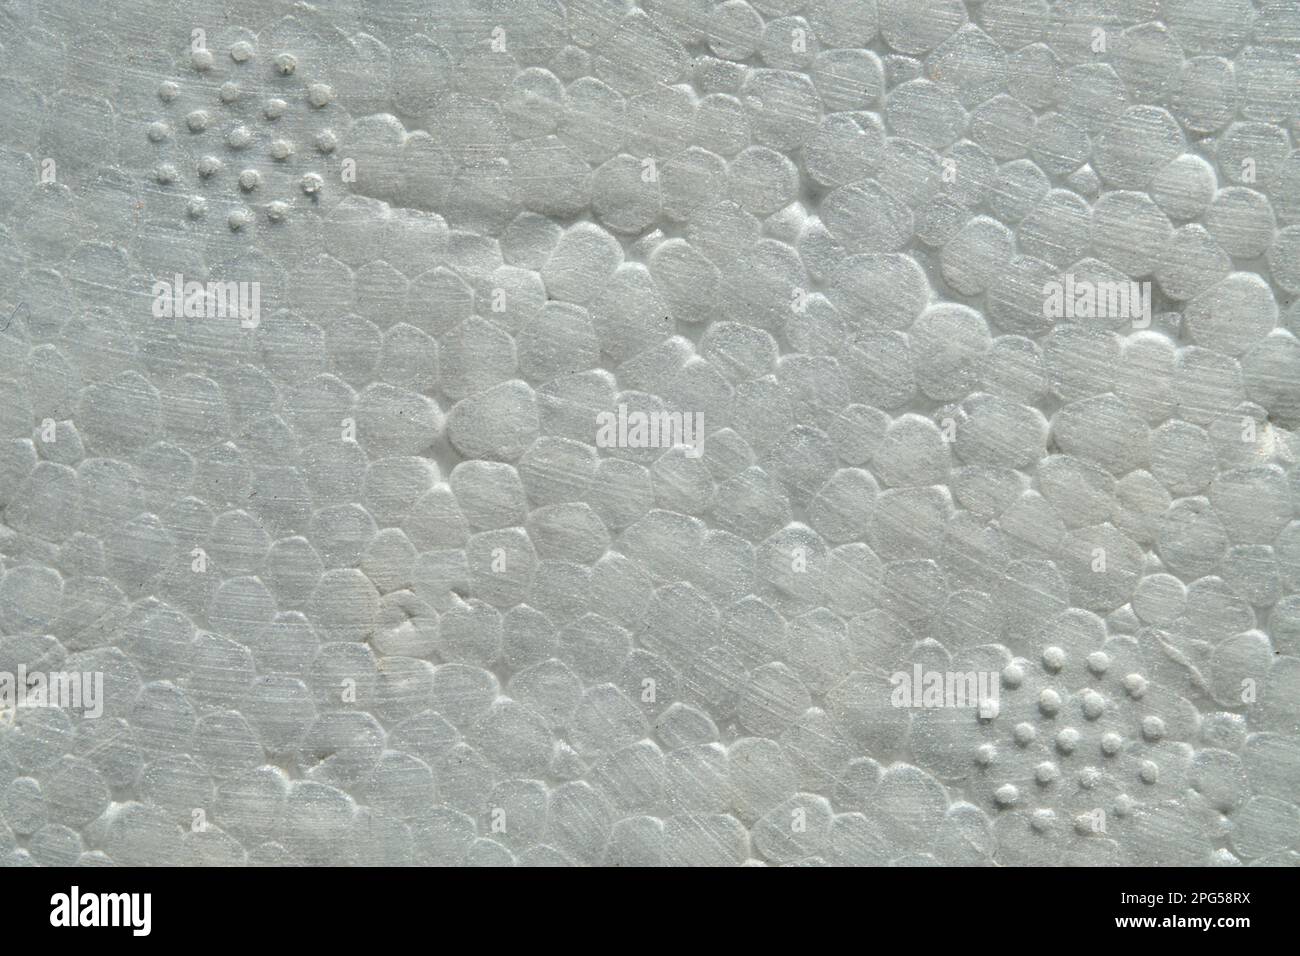 Plastic Protective Foam Background And Texture Macro View Of White Packing  Foam Background Bubbly Plastic Protective Granules Closeup View Of  Polystyrene For The Protection Of Fragile Packages Stock Photo - Download  Image